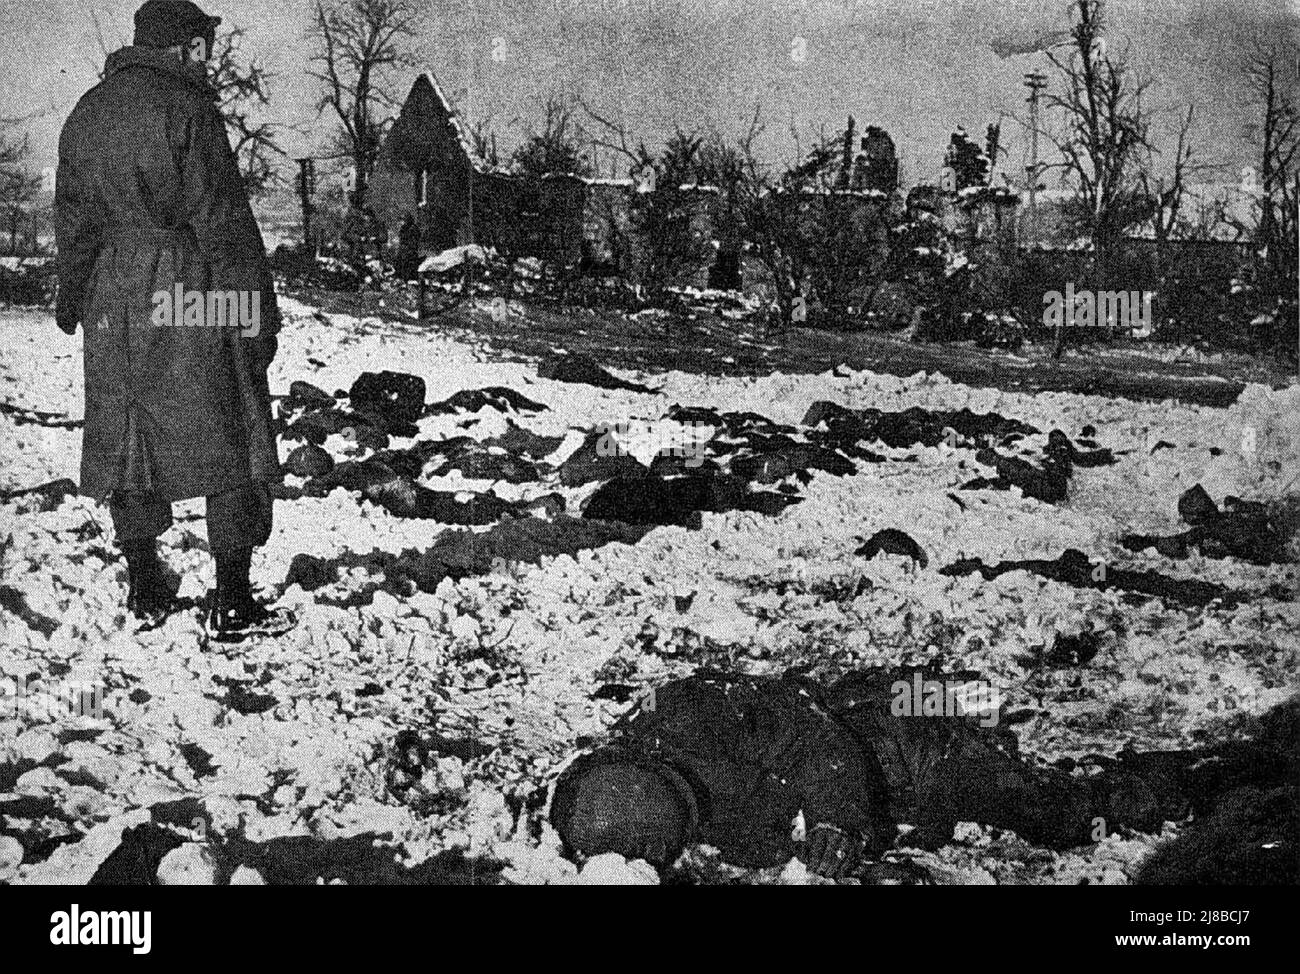 Image of MALMEDY MASSACRE, 1944. - American Soldiers Recovering The Bodies  Of Their Comrades In A Snow-covered Field After They Were Massacred By  German Waffen-SS Soldiers Near Malmedy, Belgium, During World War